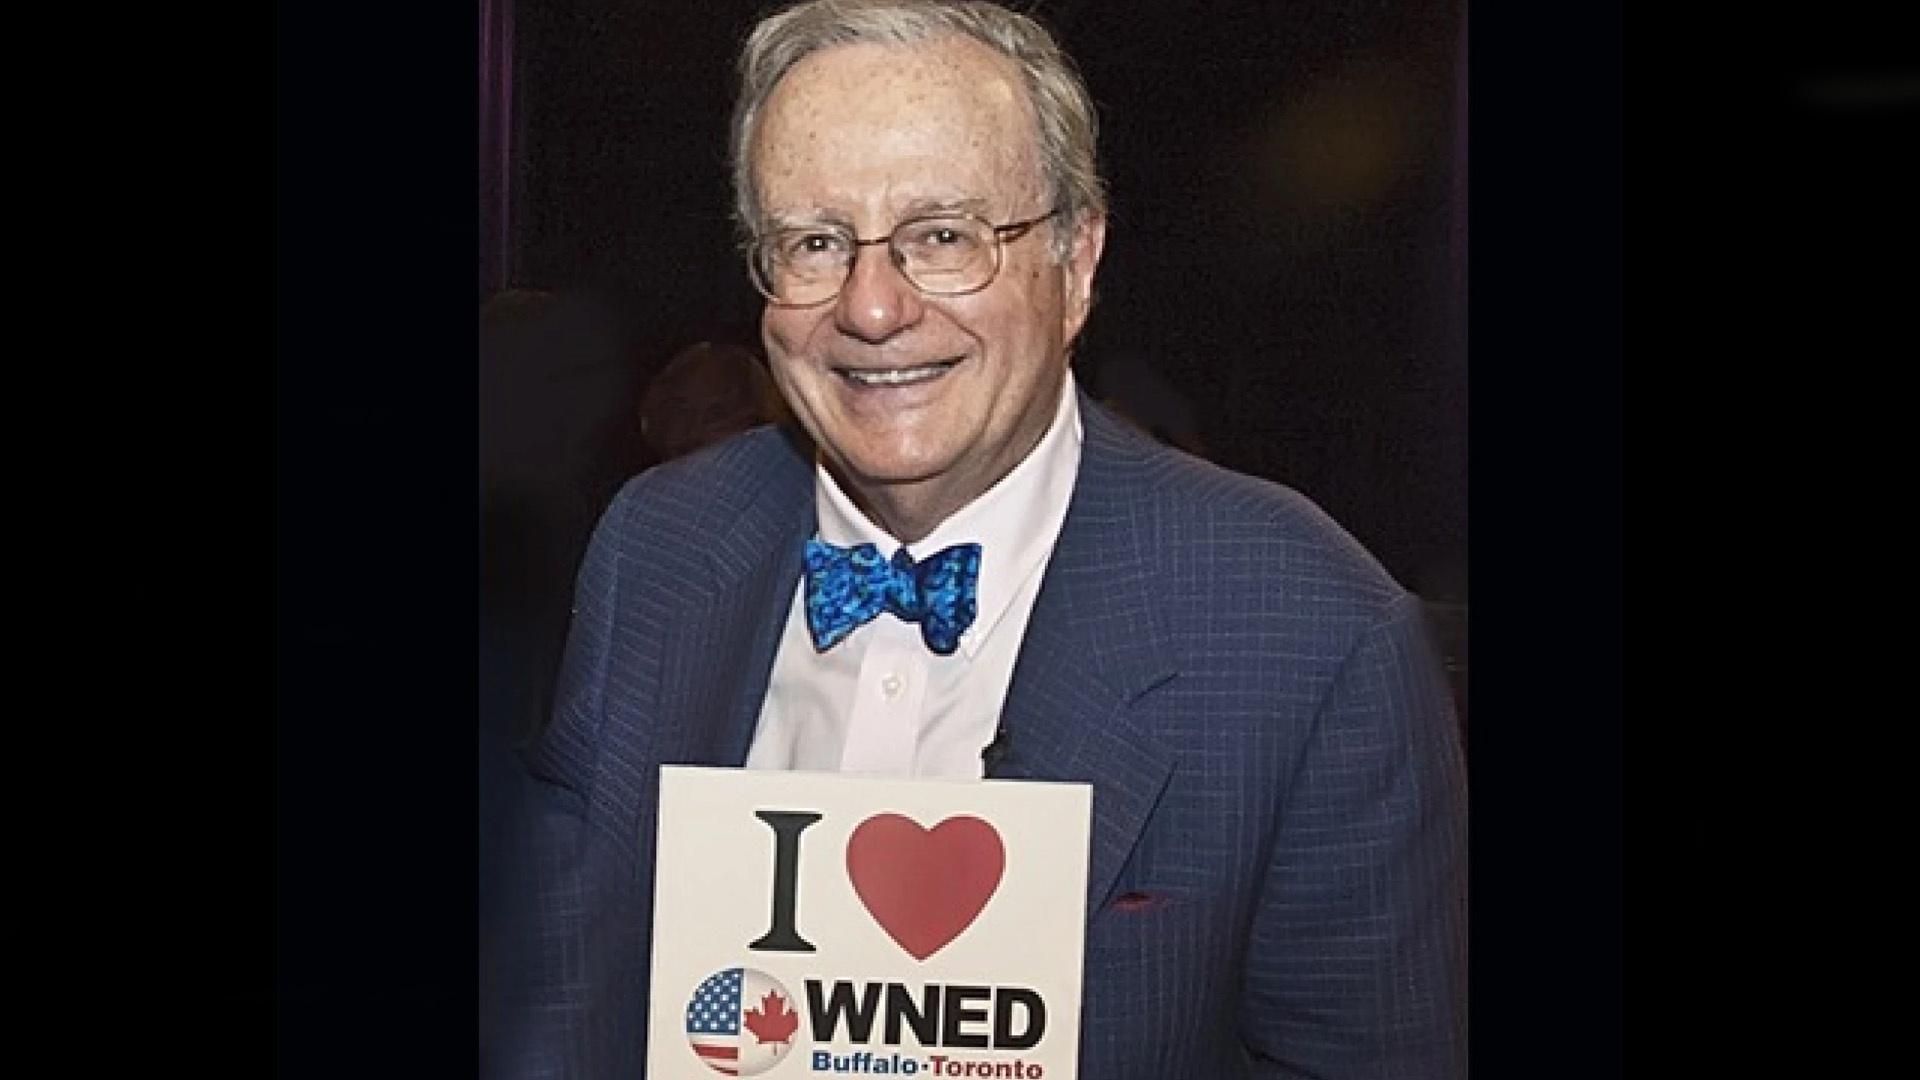 Mark Russell holding a sign that says "I heart WNED"